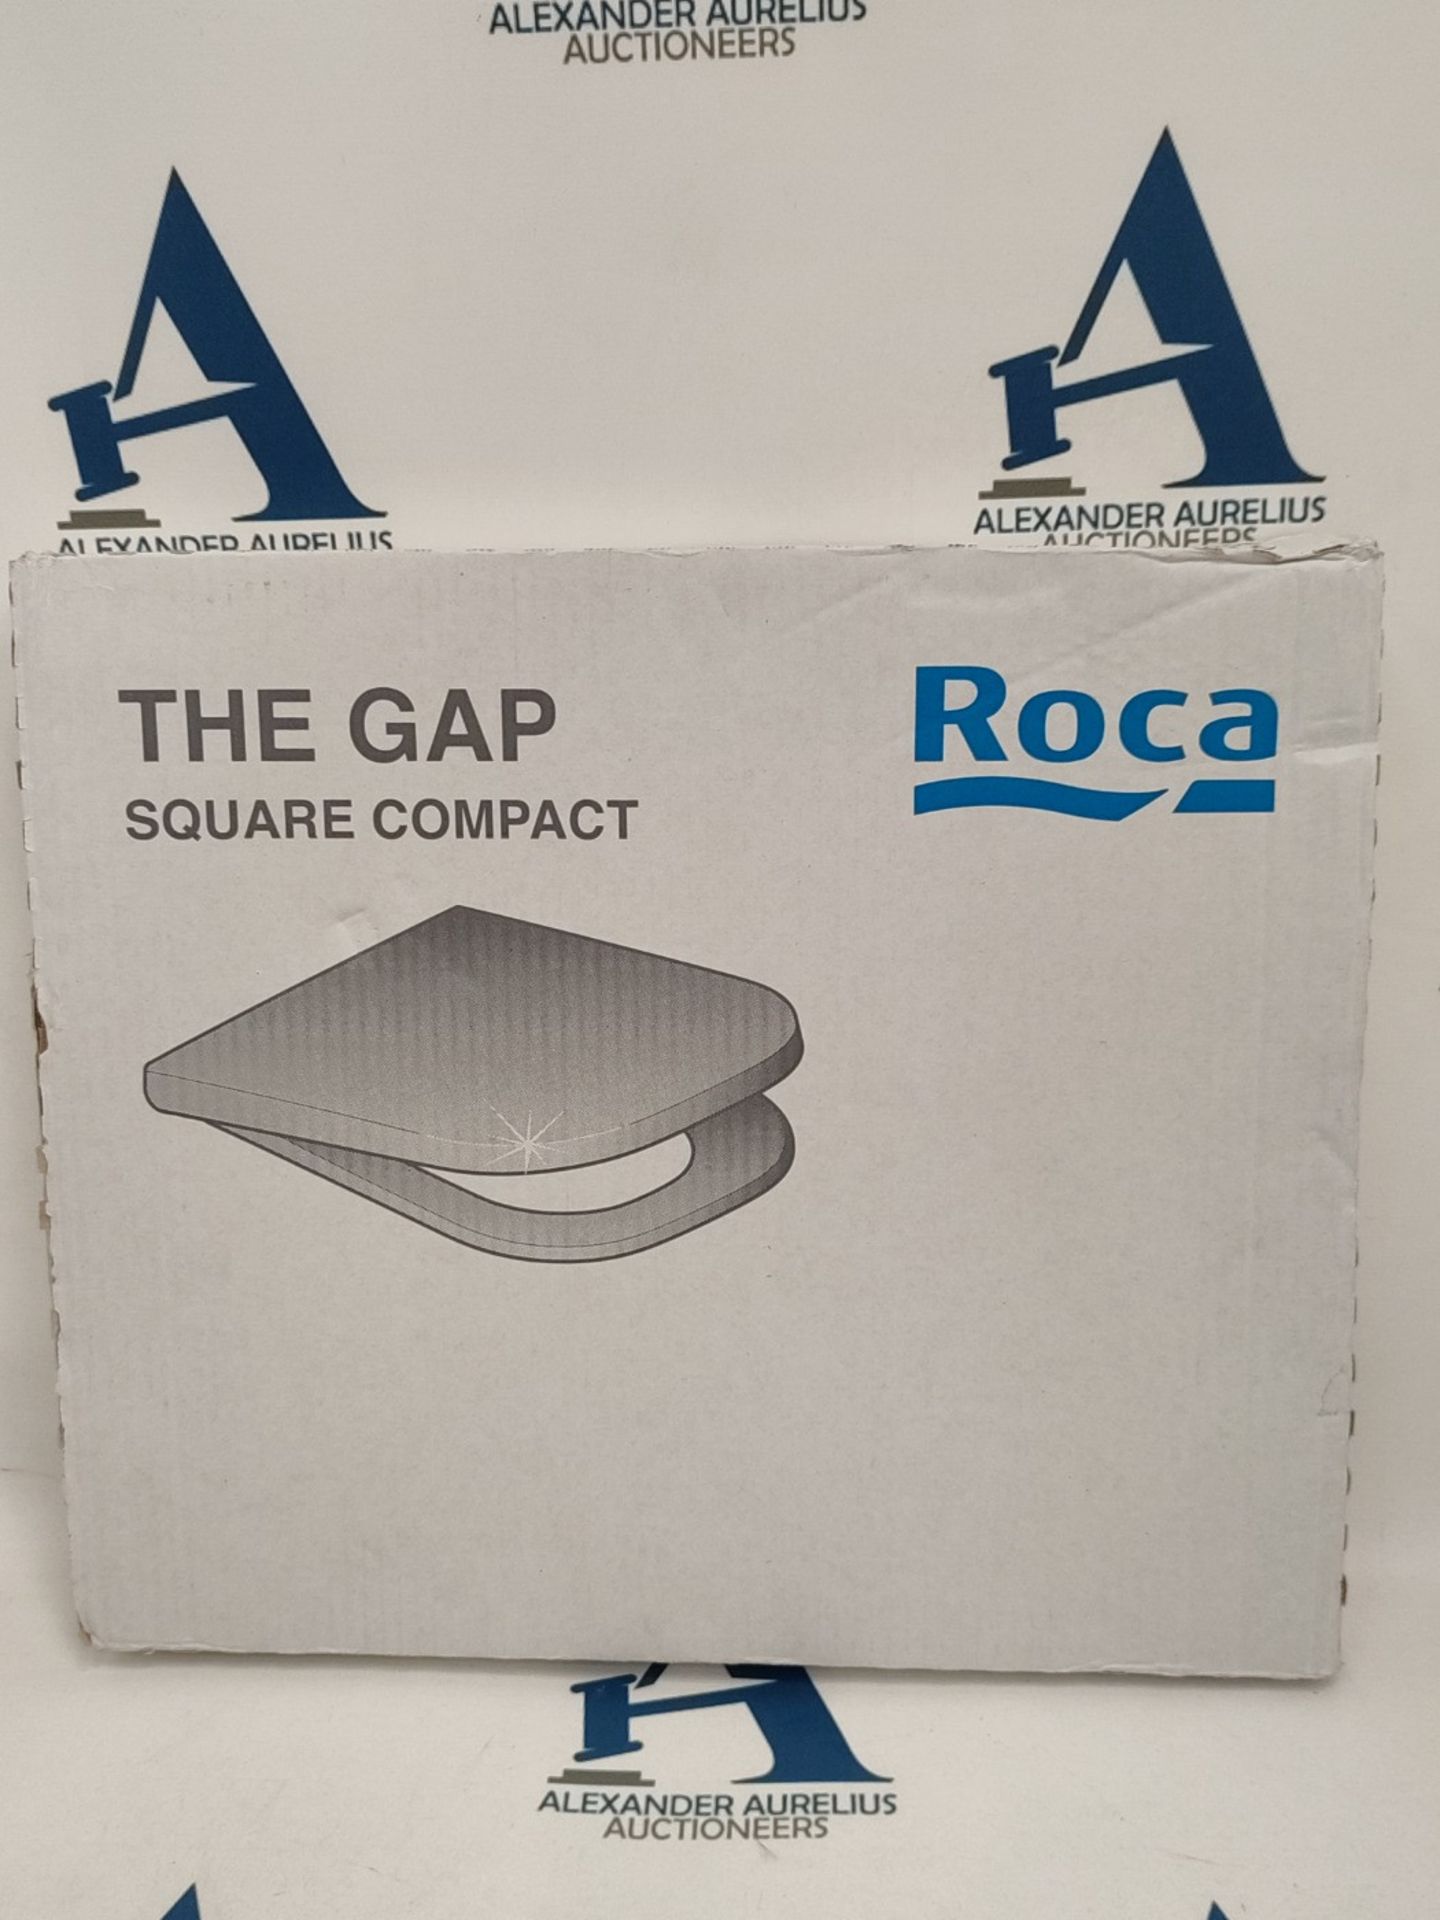 Roca A80173000B Supralit Seat & Cover, The Gap Square Compact, White - Image 2 of 3